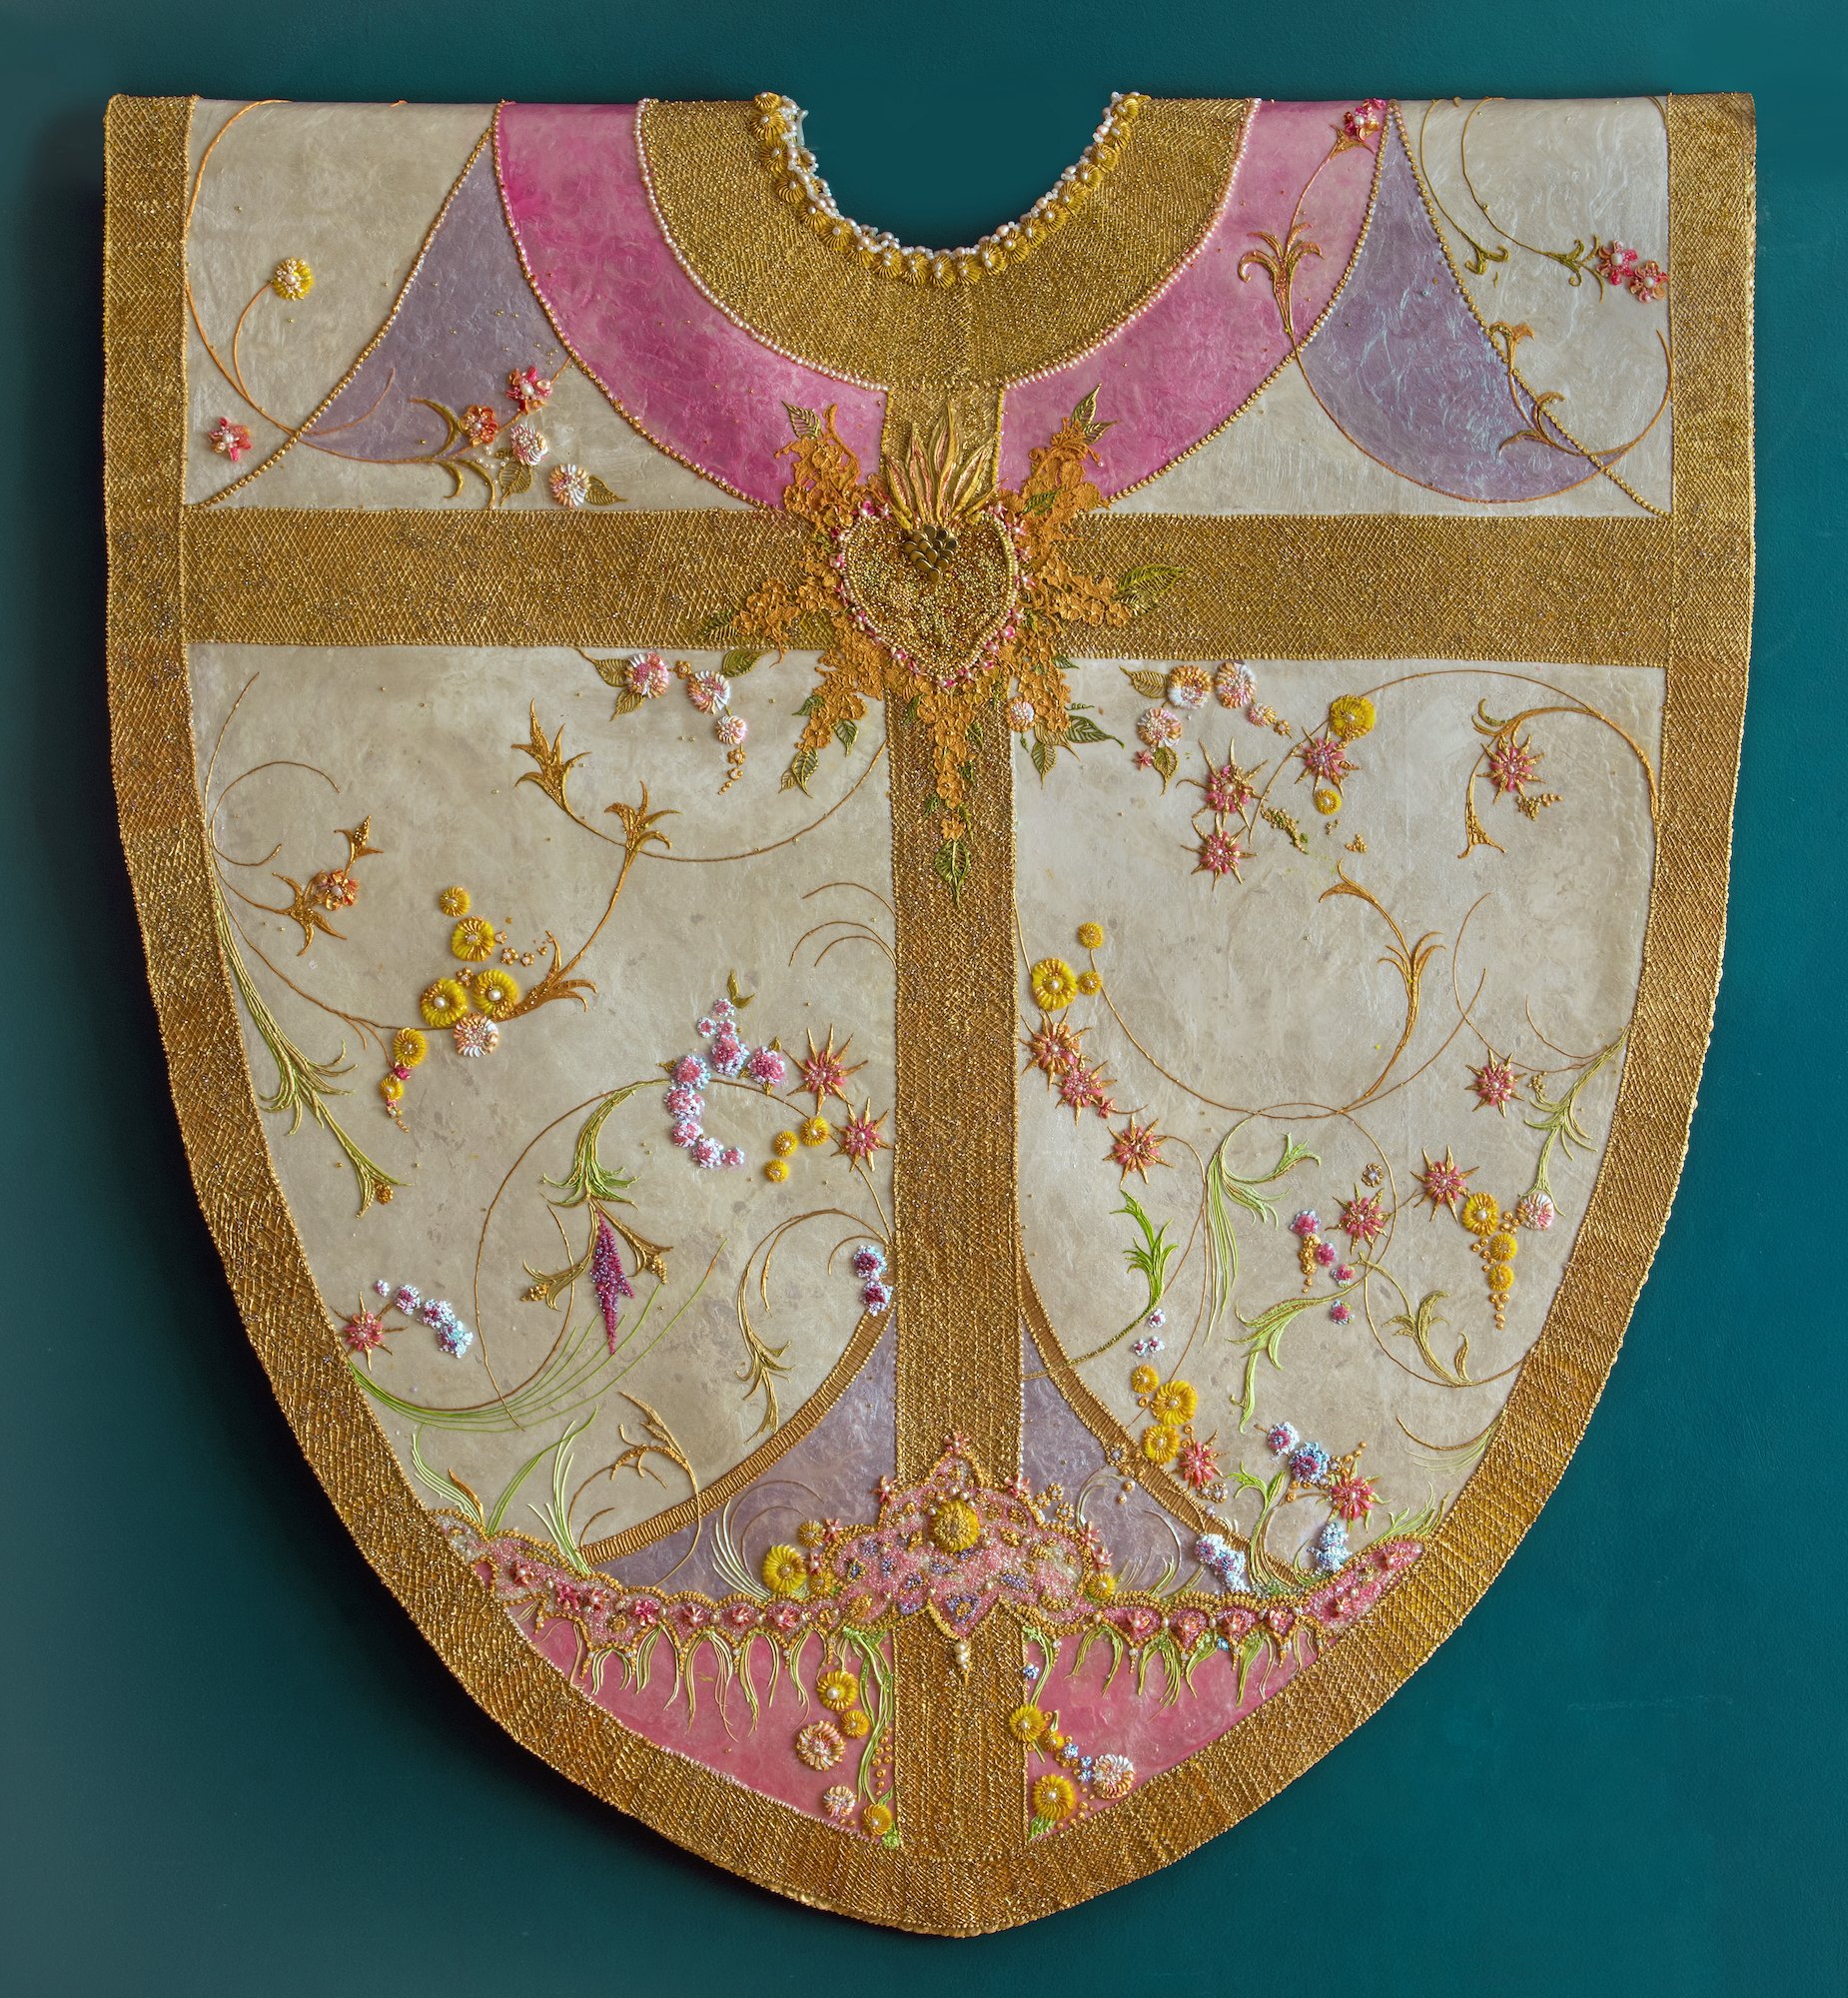 Vestment in pink, gold, white, and purple in paint.